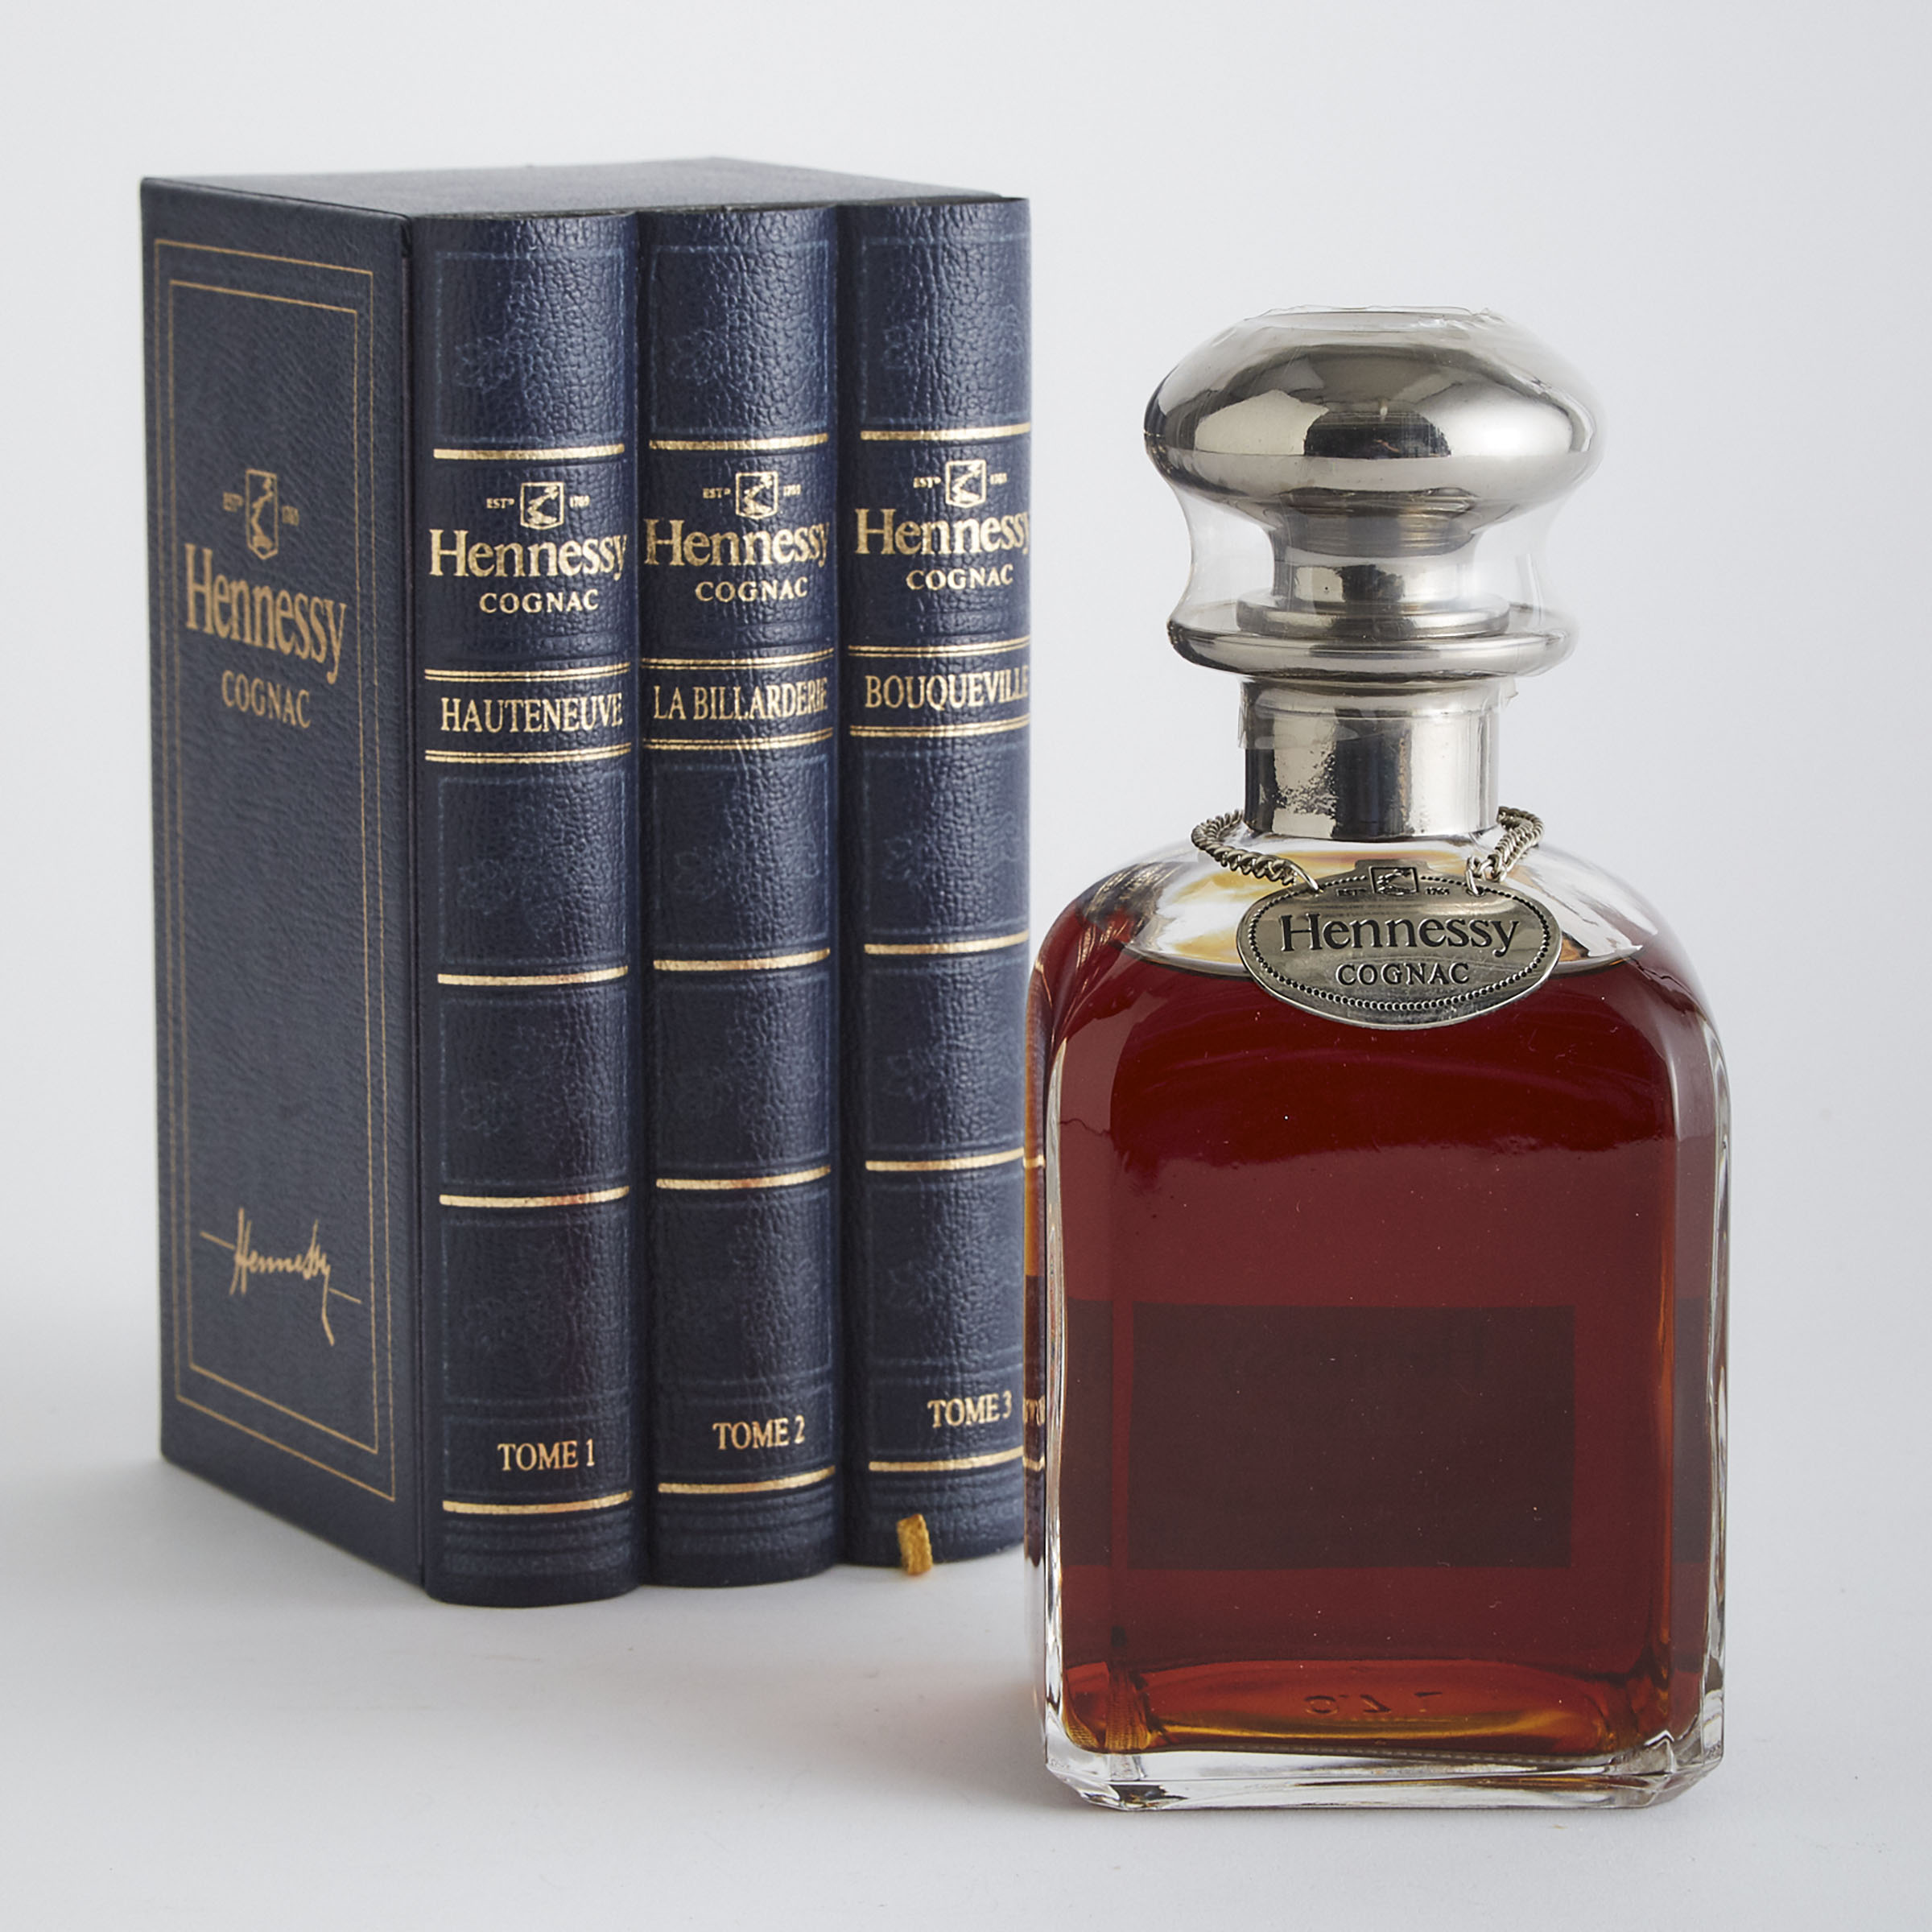 HENNESSY OLD COGNAC (ONE 700 ML)